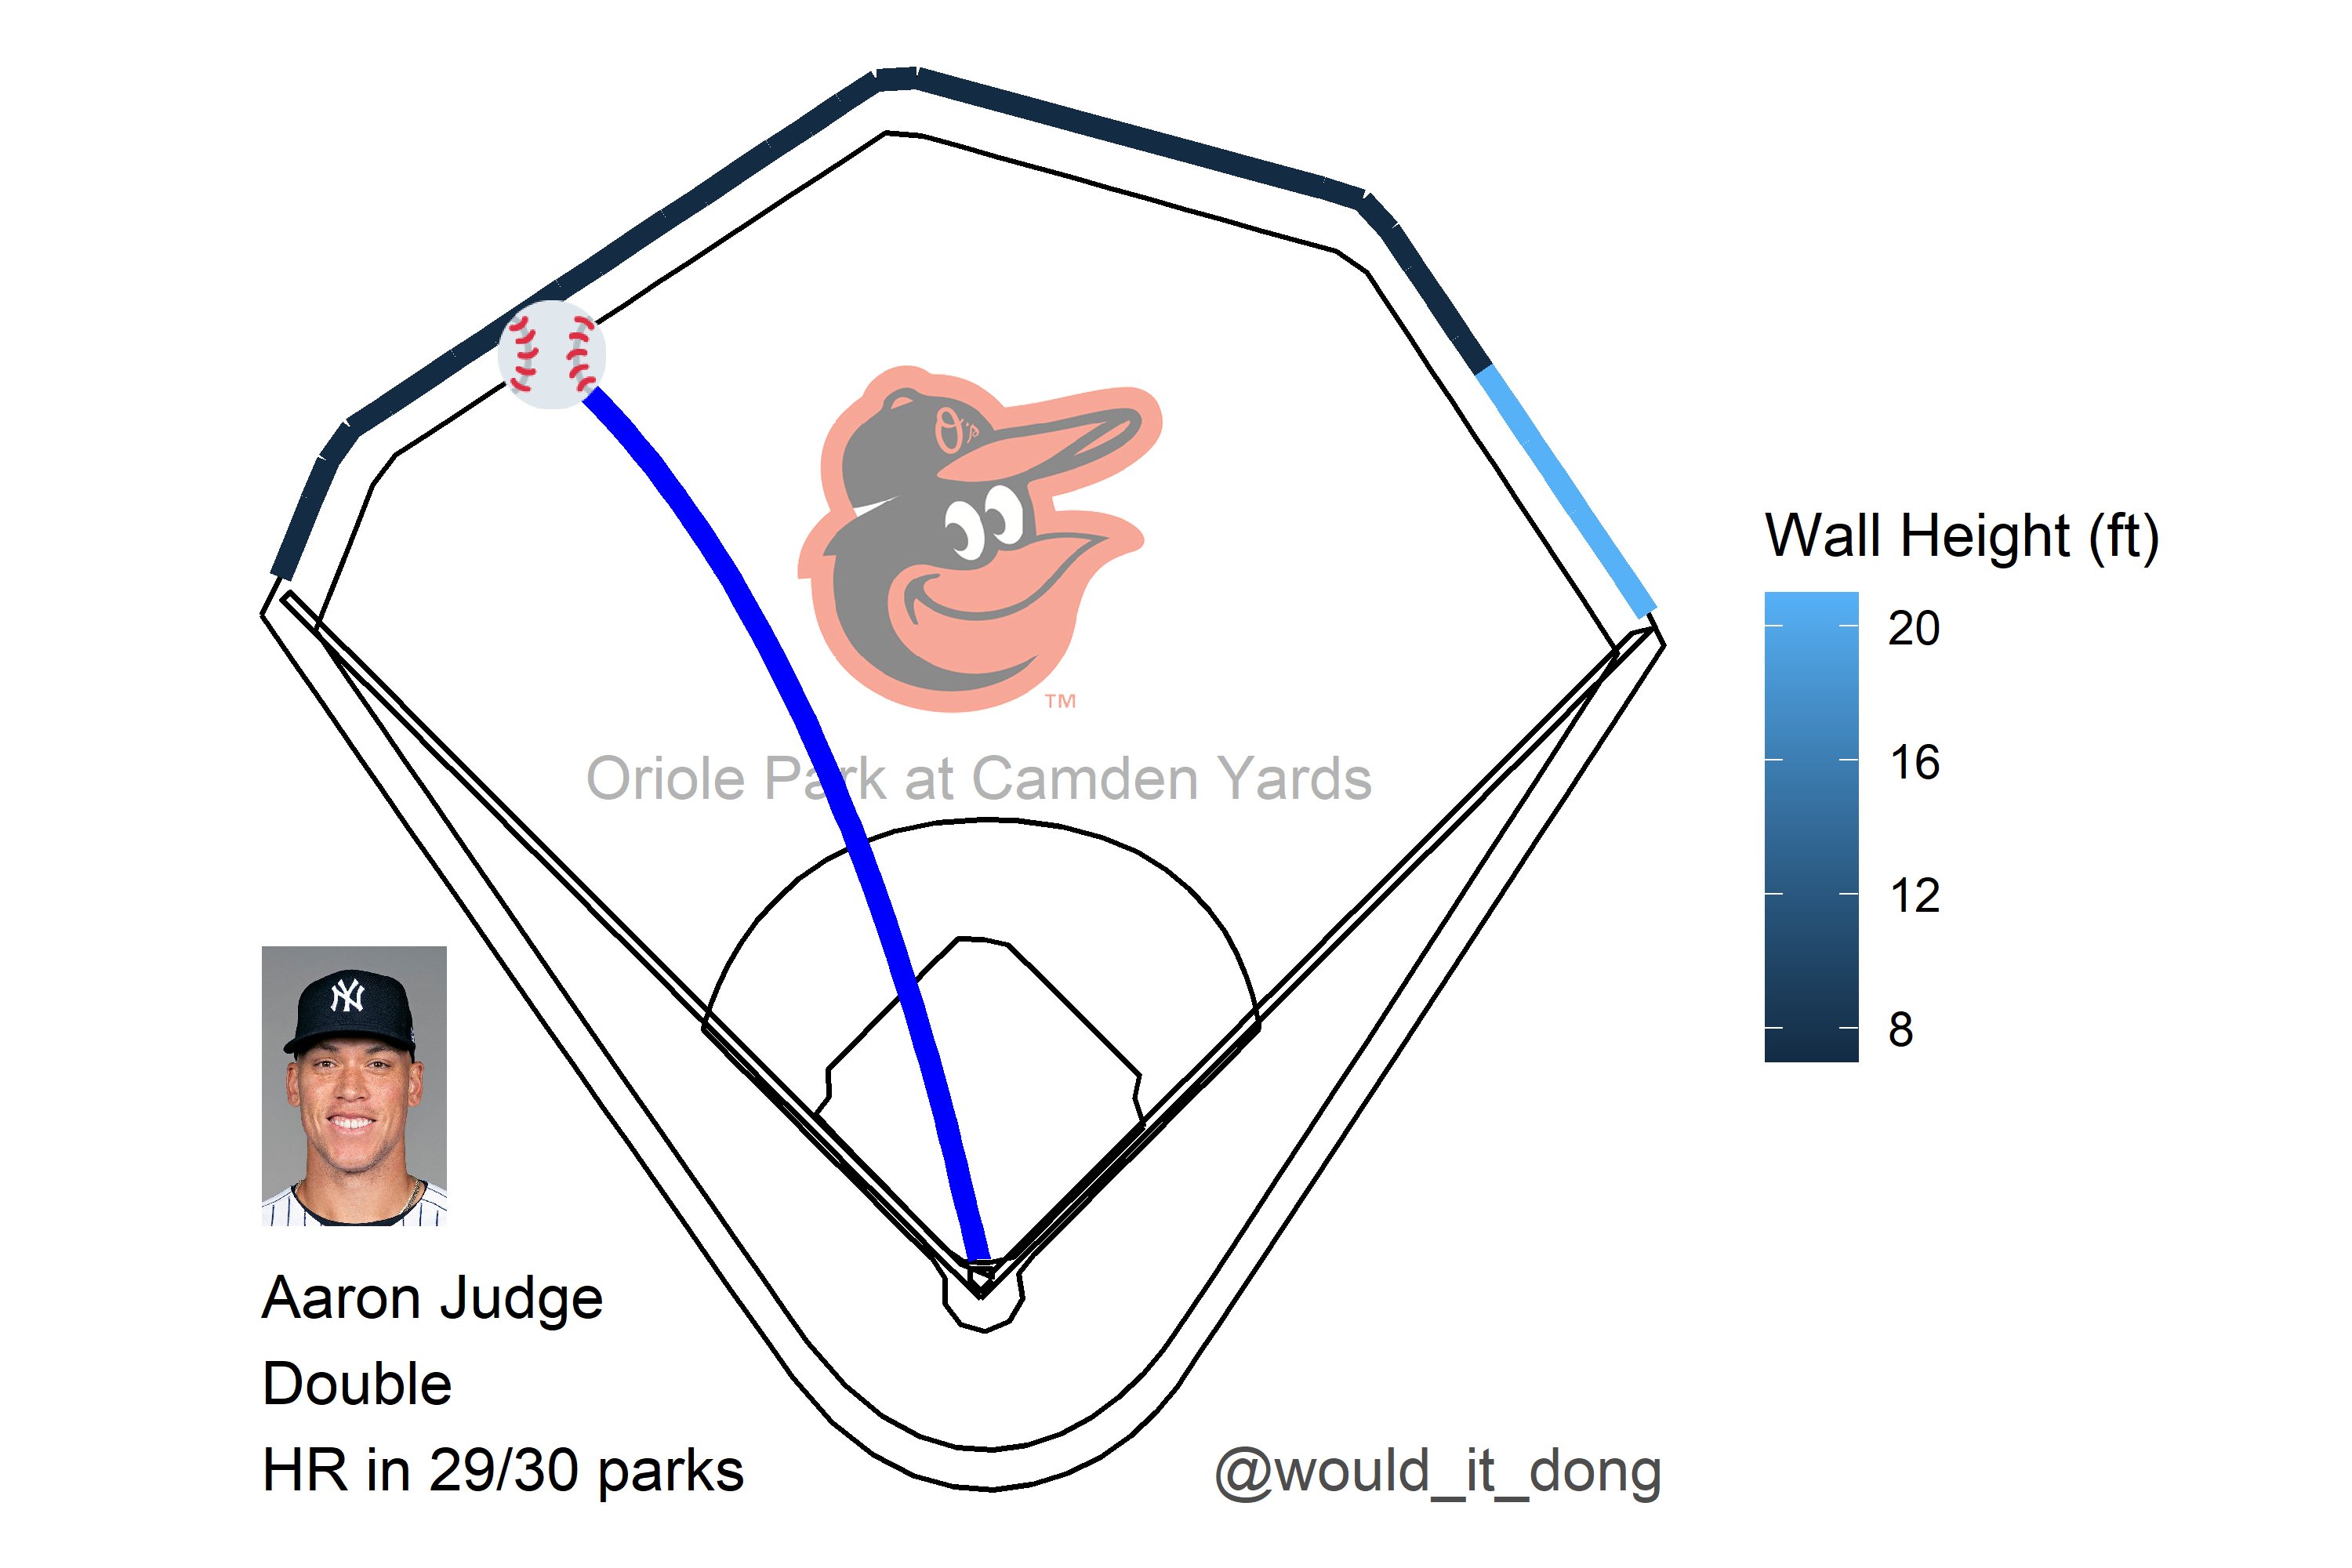 Would it dong? on X: Aaron Judge vs Spenser Watkins #RepBX Double 🏃💨  Exit velo: 100.8 mph Launch angle: 30 deg Proj. distance: 399 ft This would  have been a home run